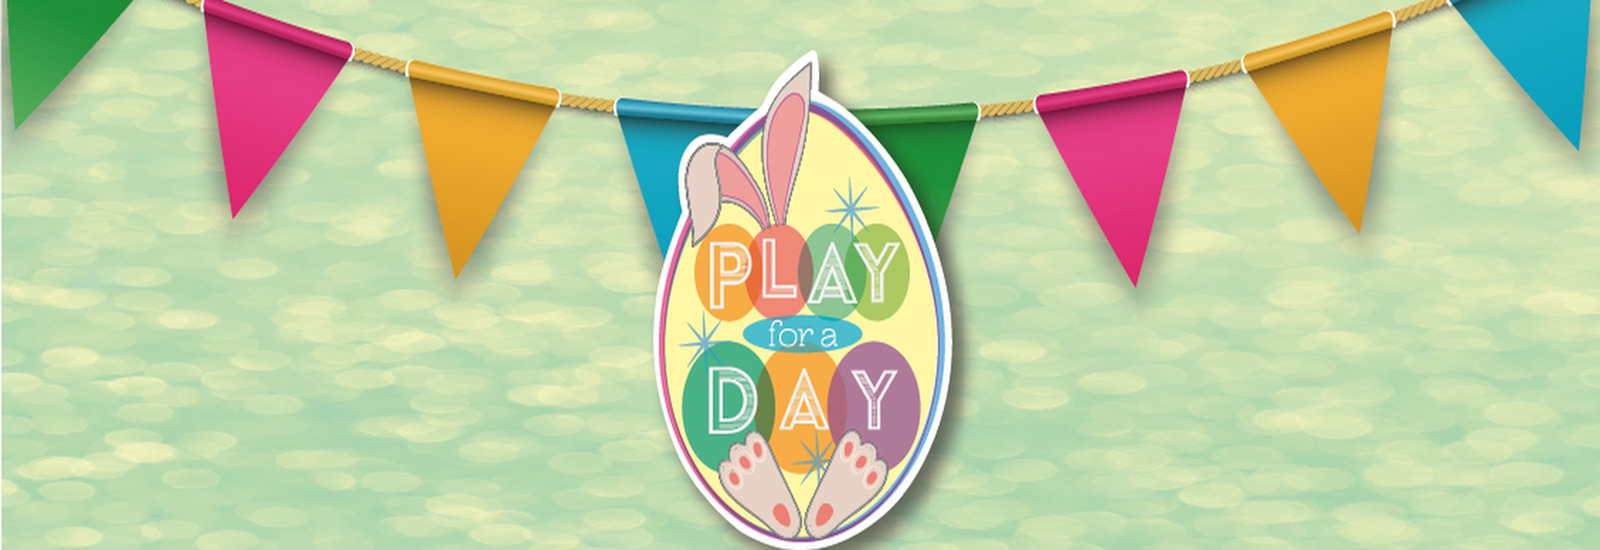 Play for a Day